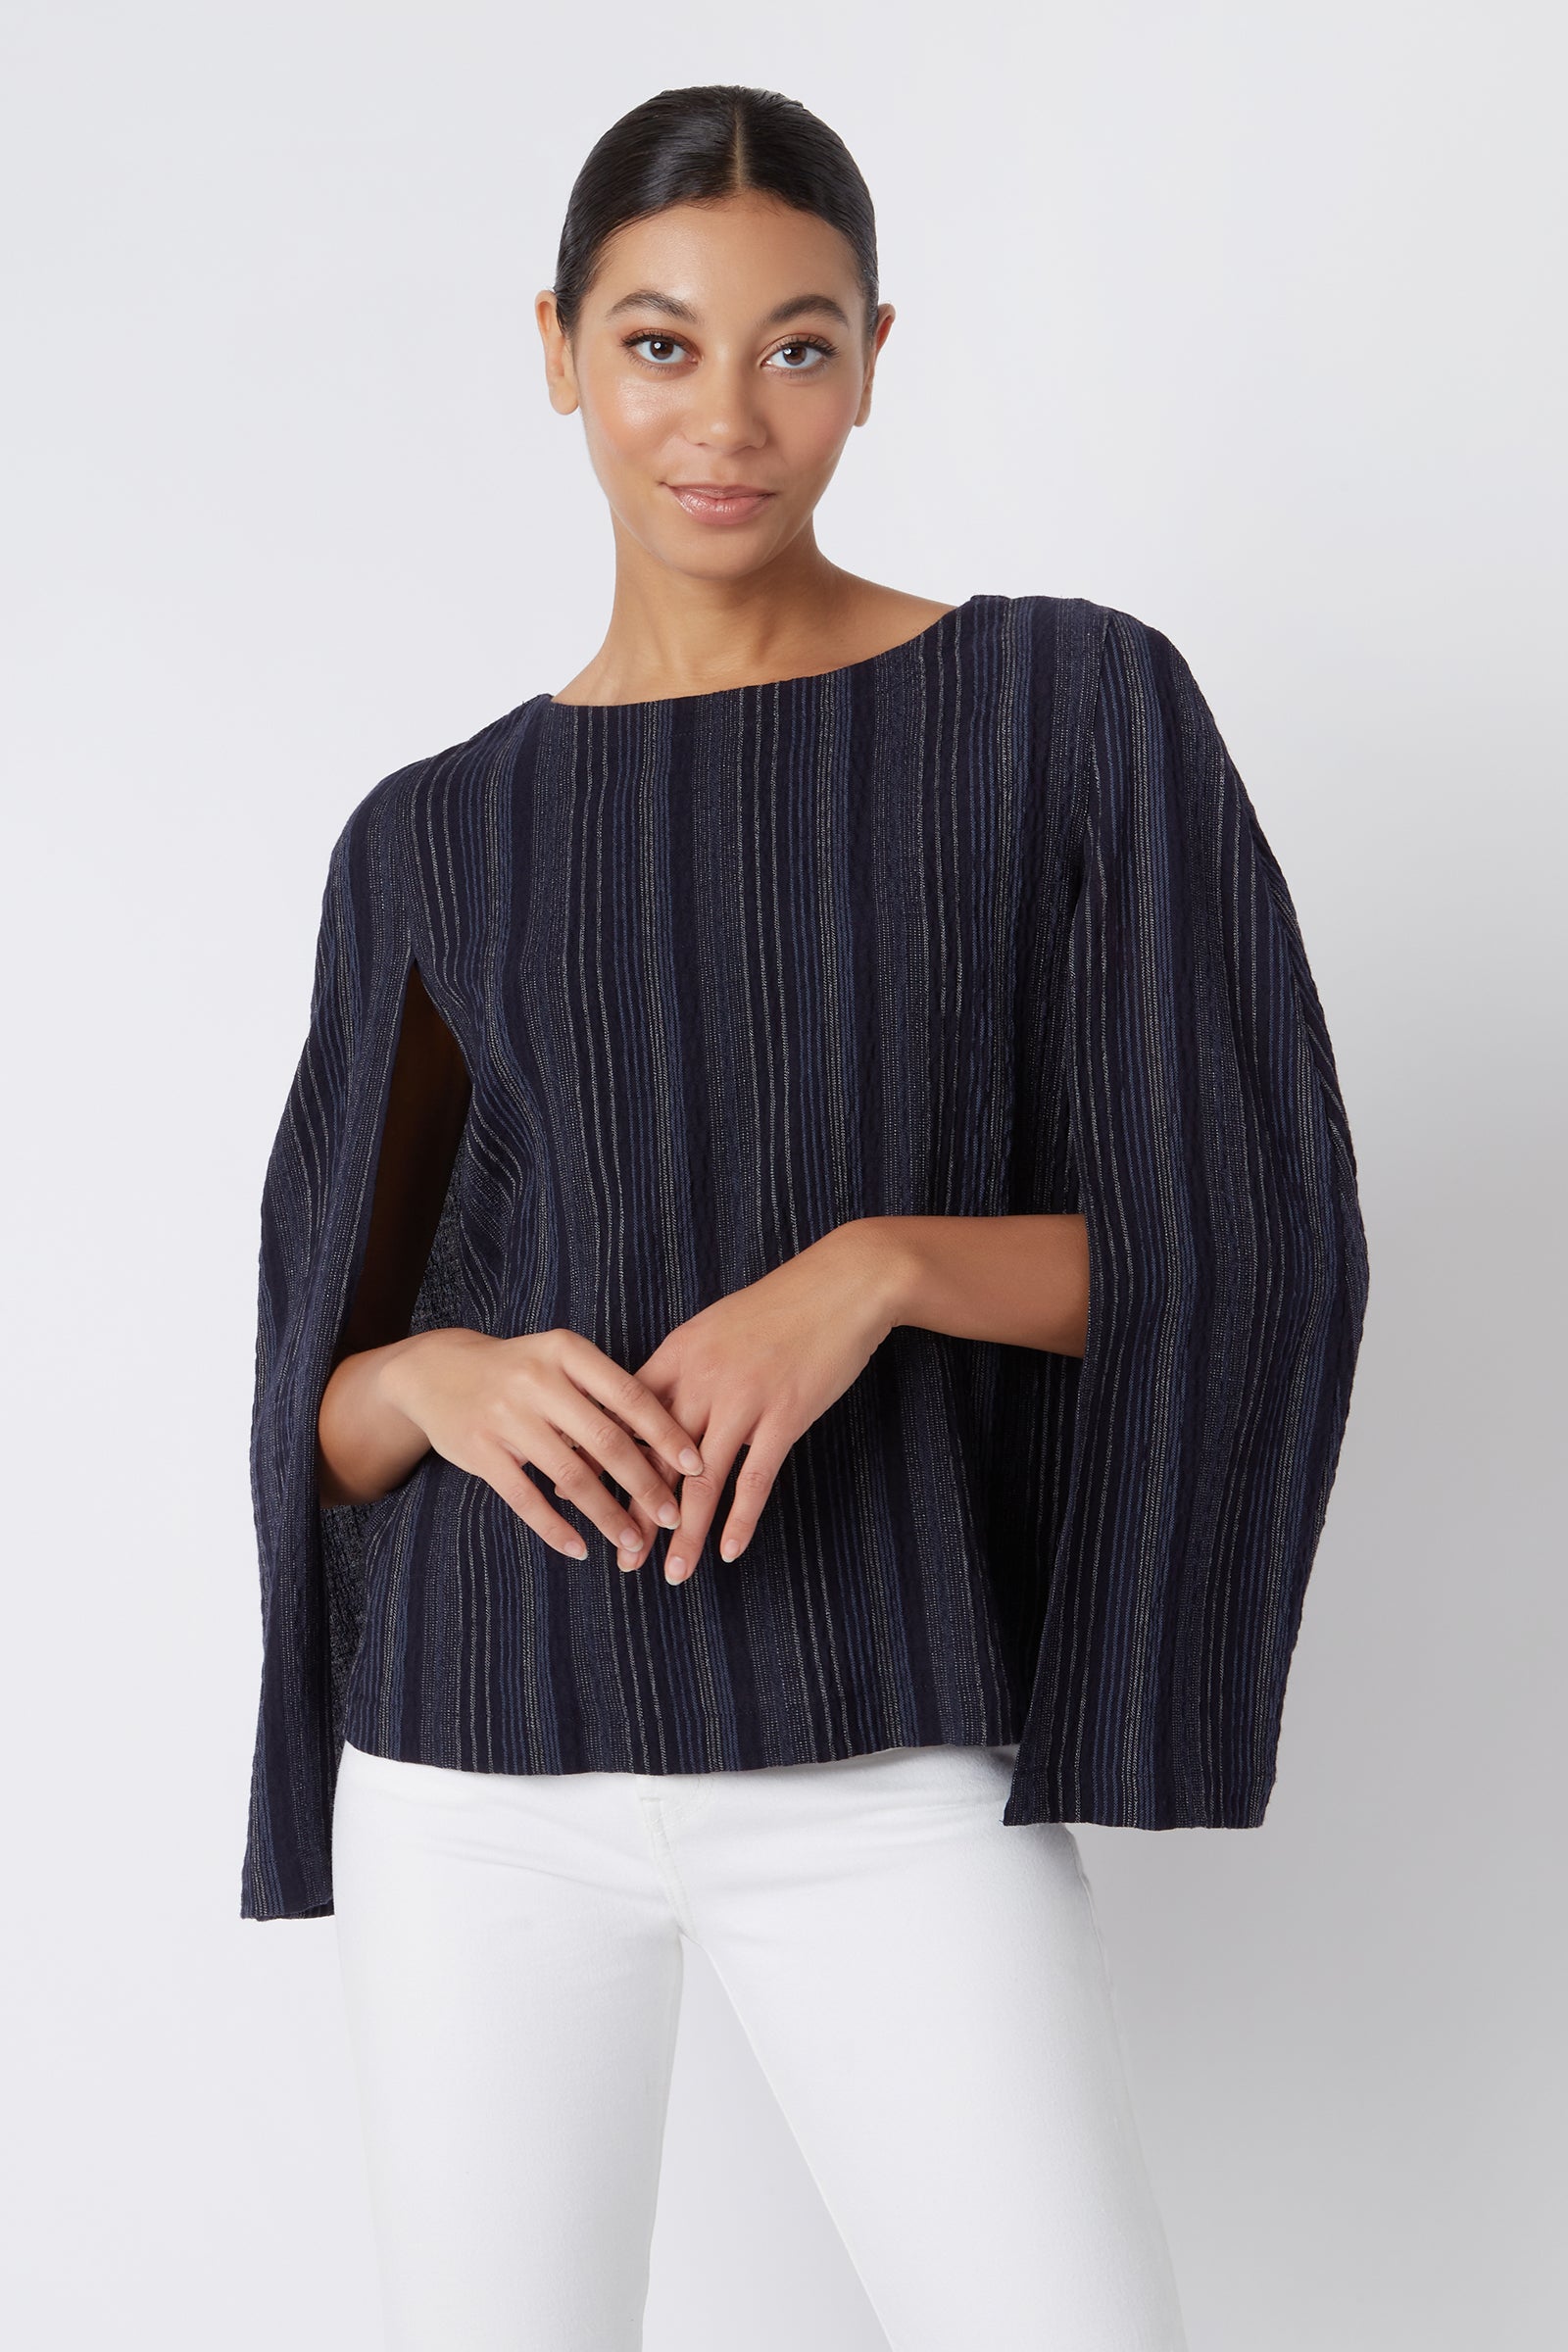 Cape Sweatshirt in Navy Made from Bamboo and Cotton French Terry – KAL ...